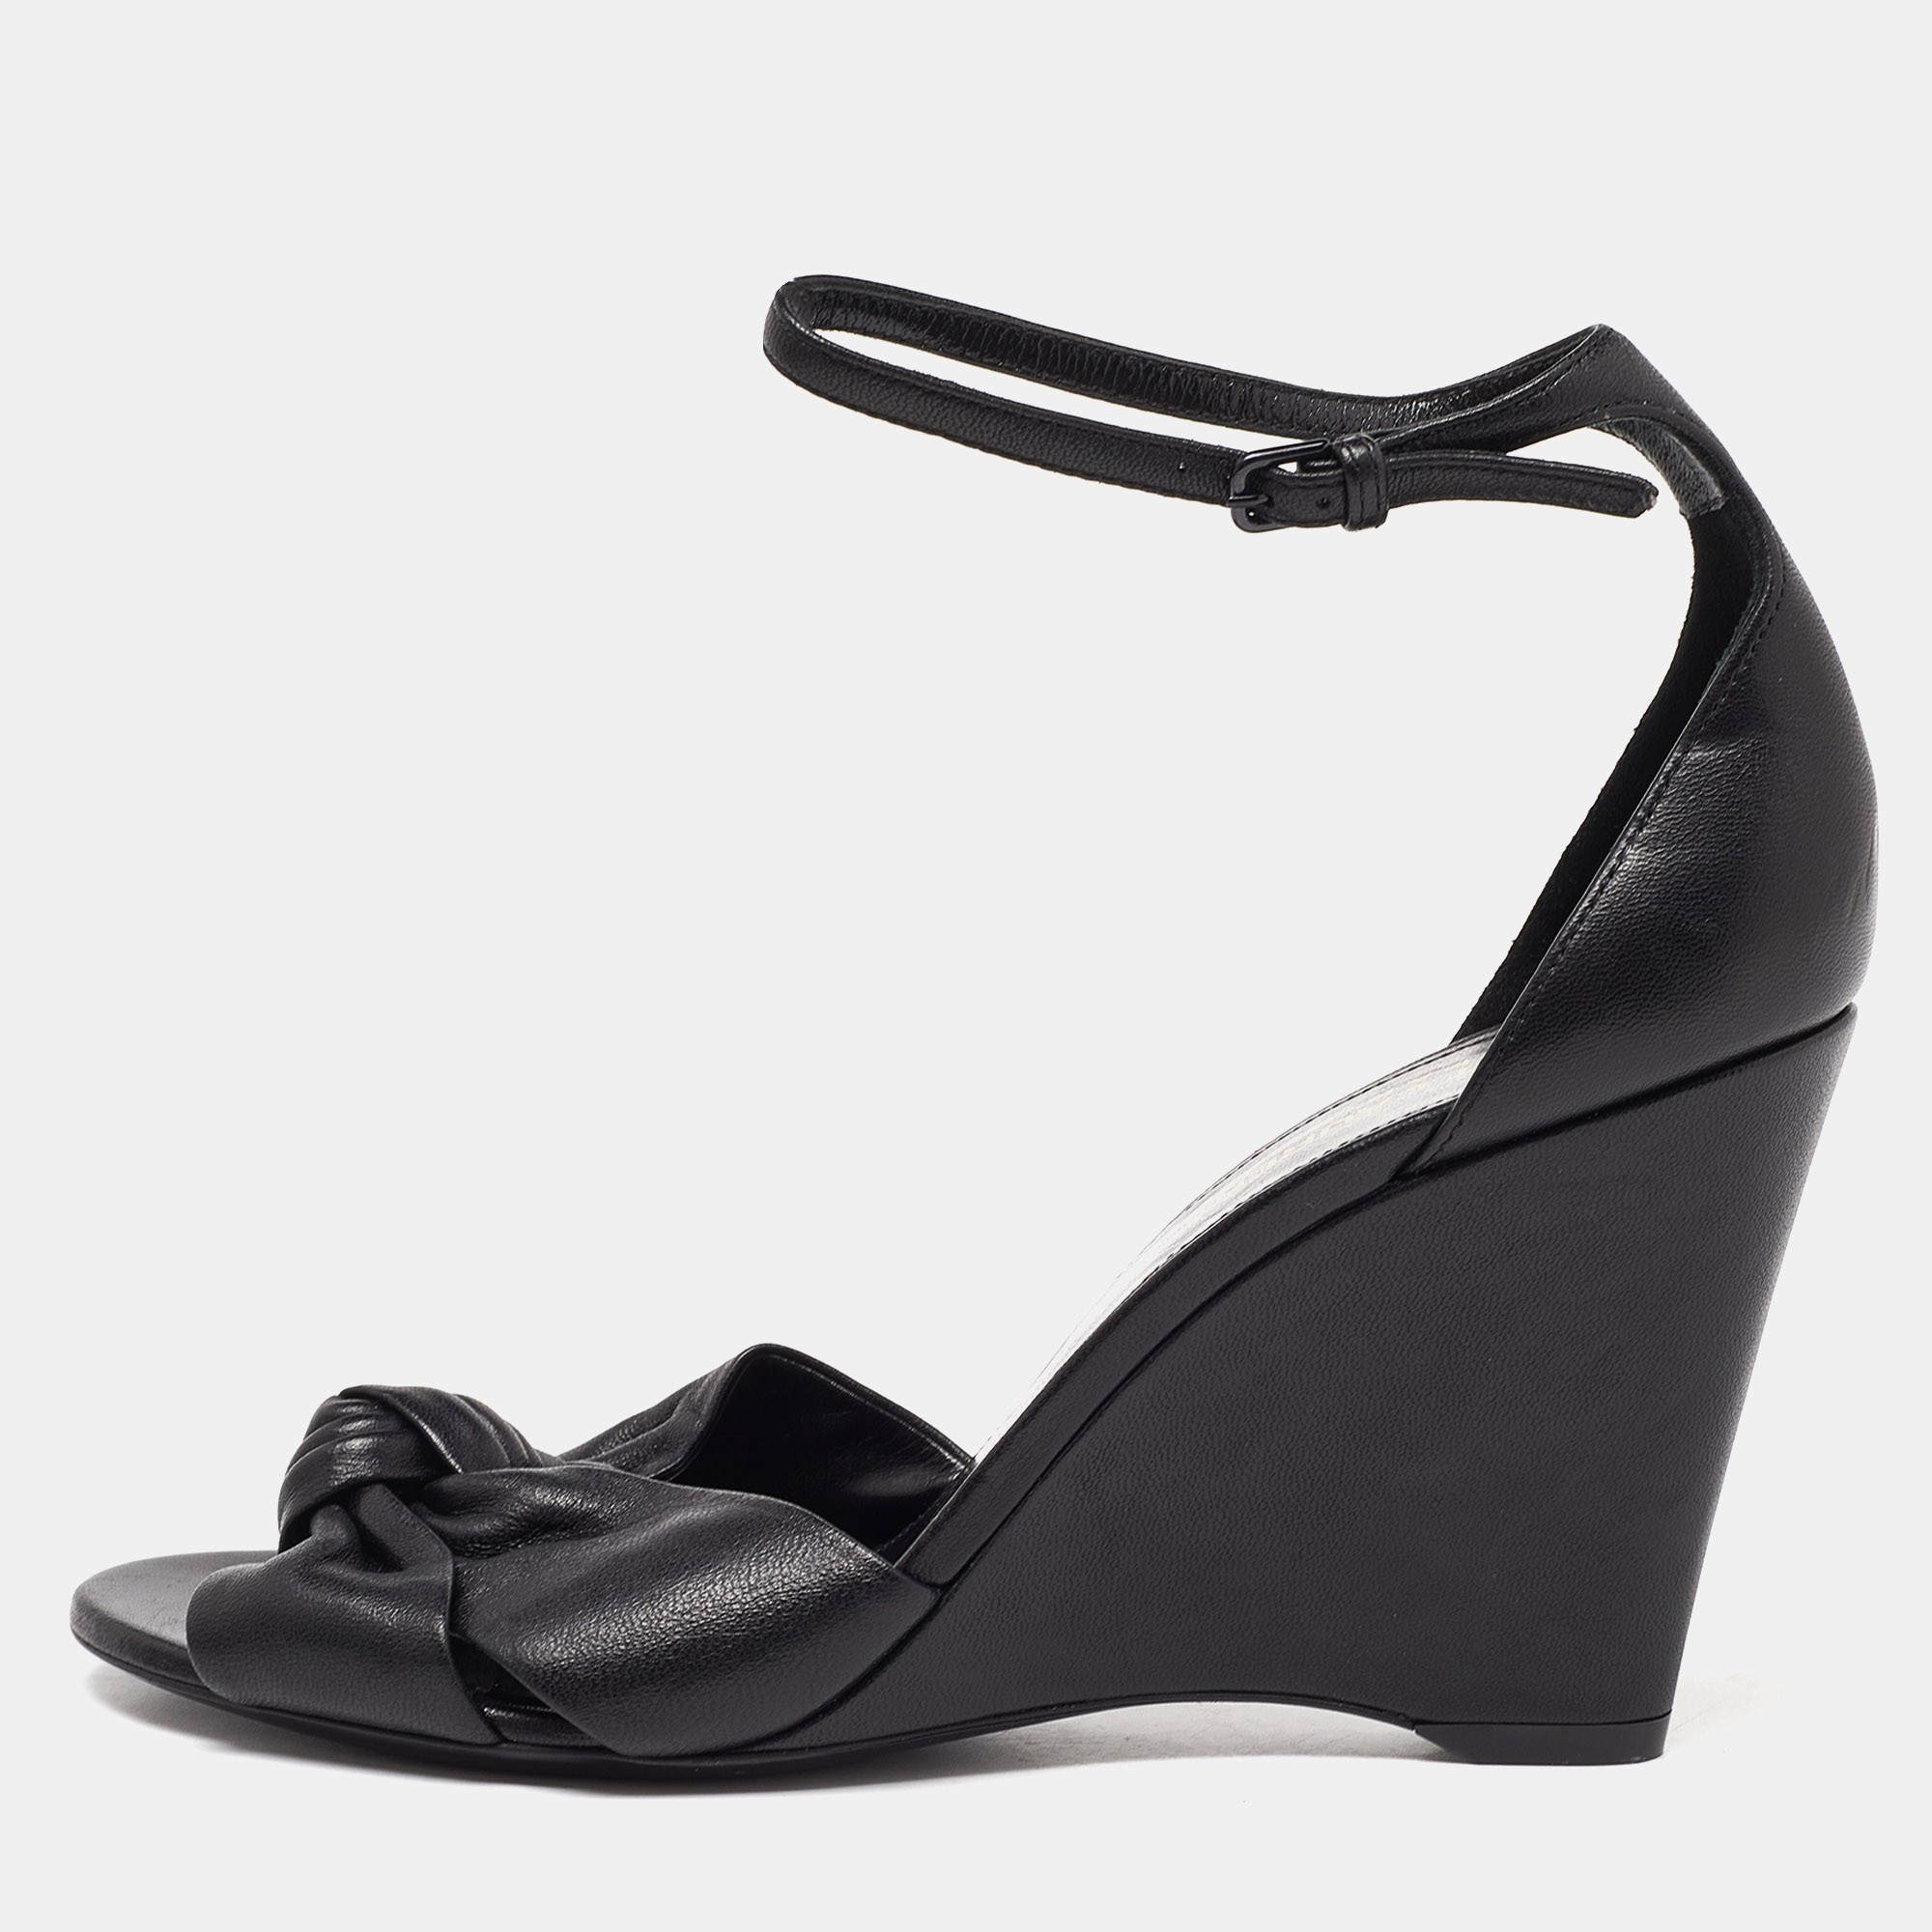 Lend an elegant finish to your look of the day with these Saint Laurent leather sandals. They feature open toes ankle strap closure and wedge heels.